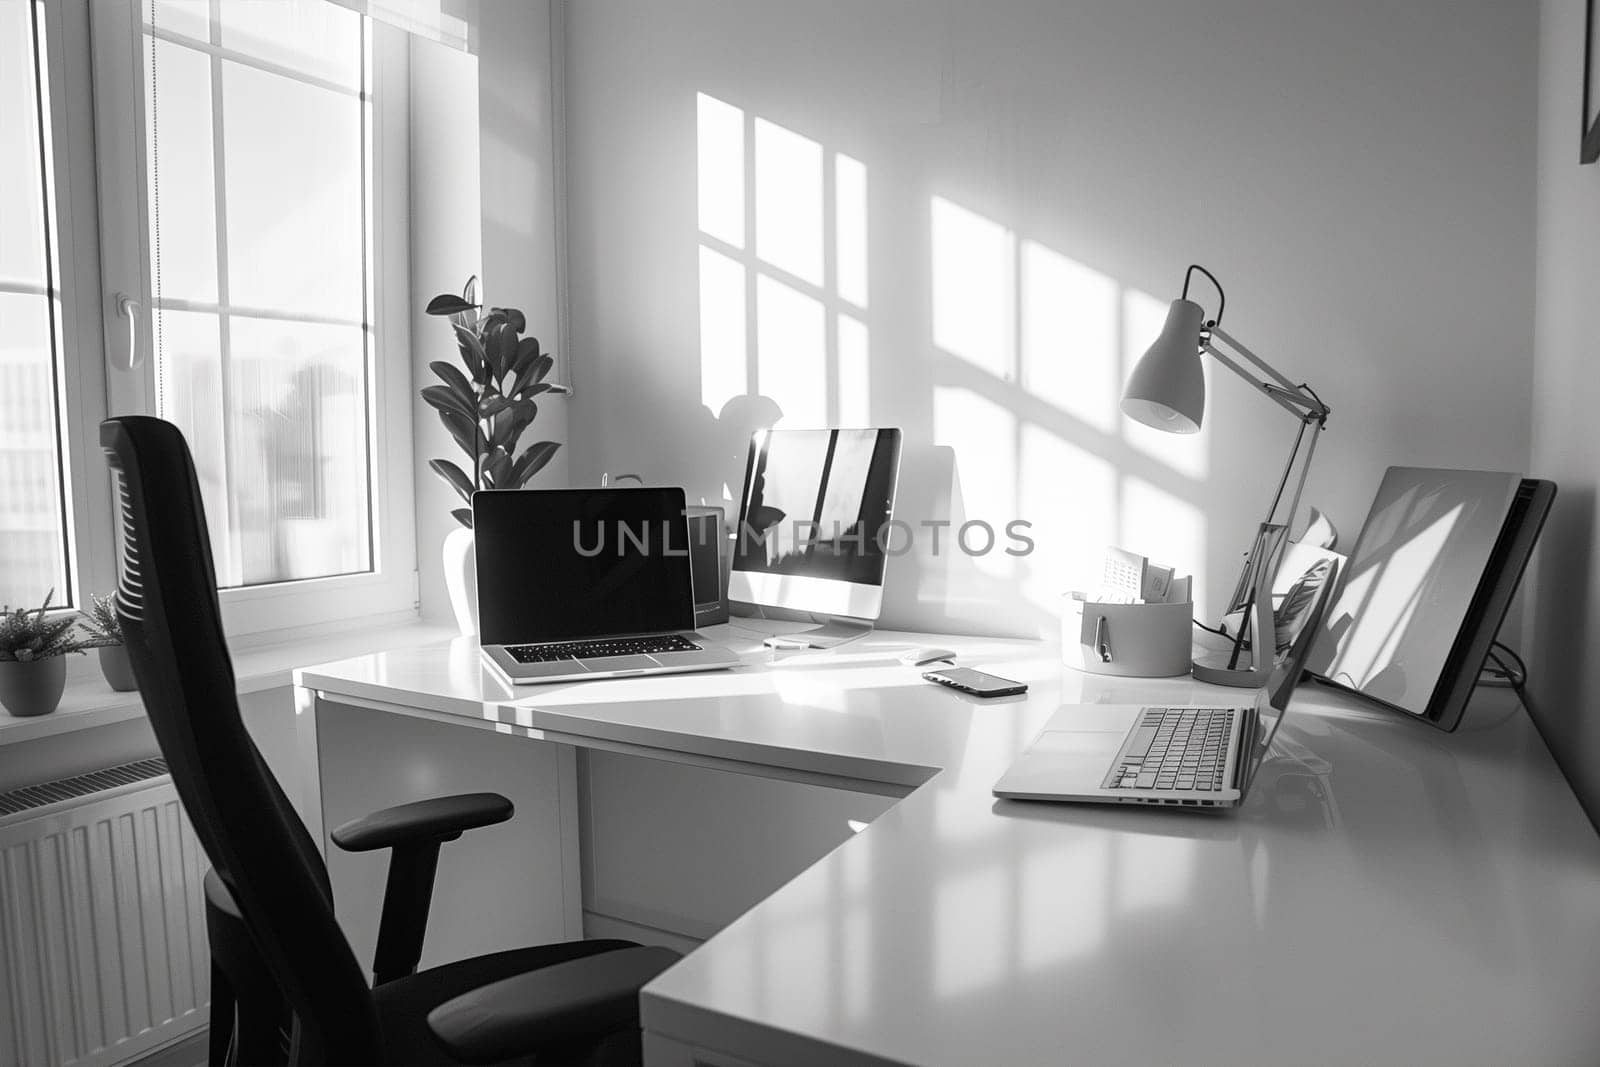 A monochromatic photo featuring a desk with a laptop placed on it.